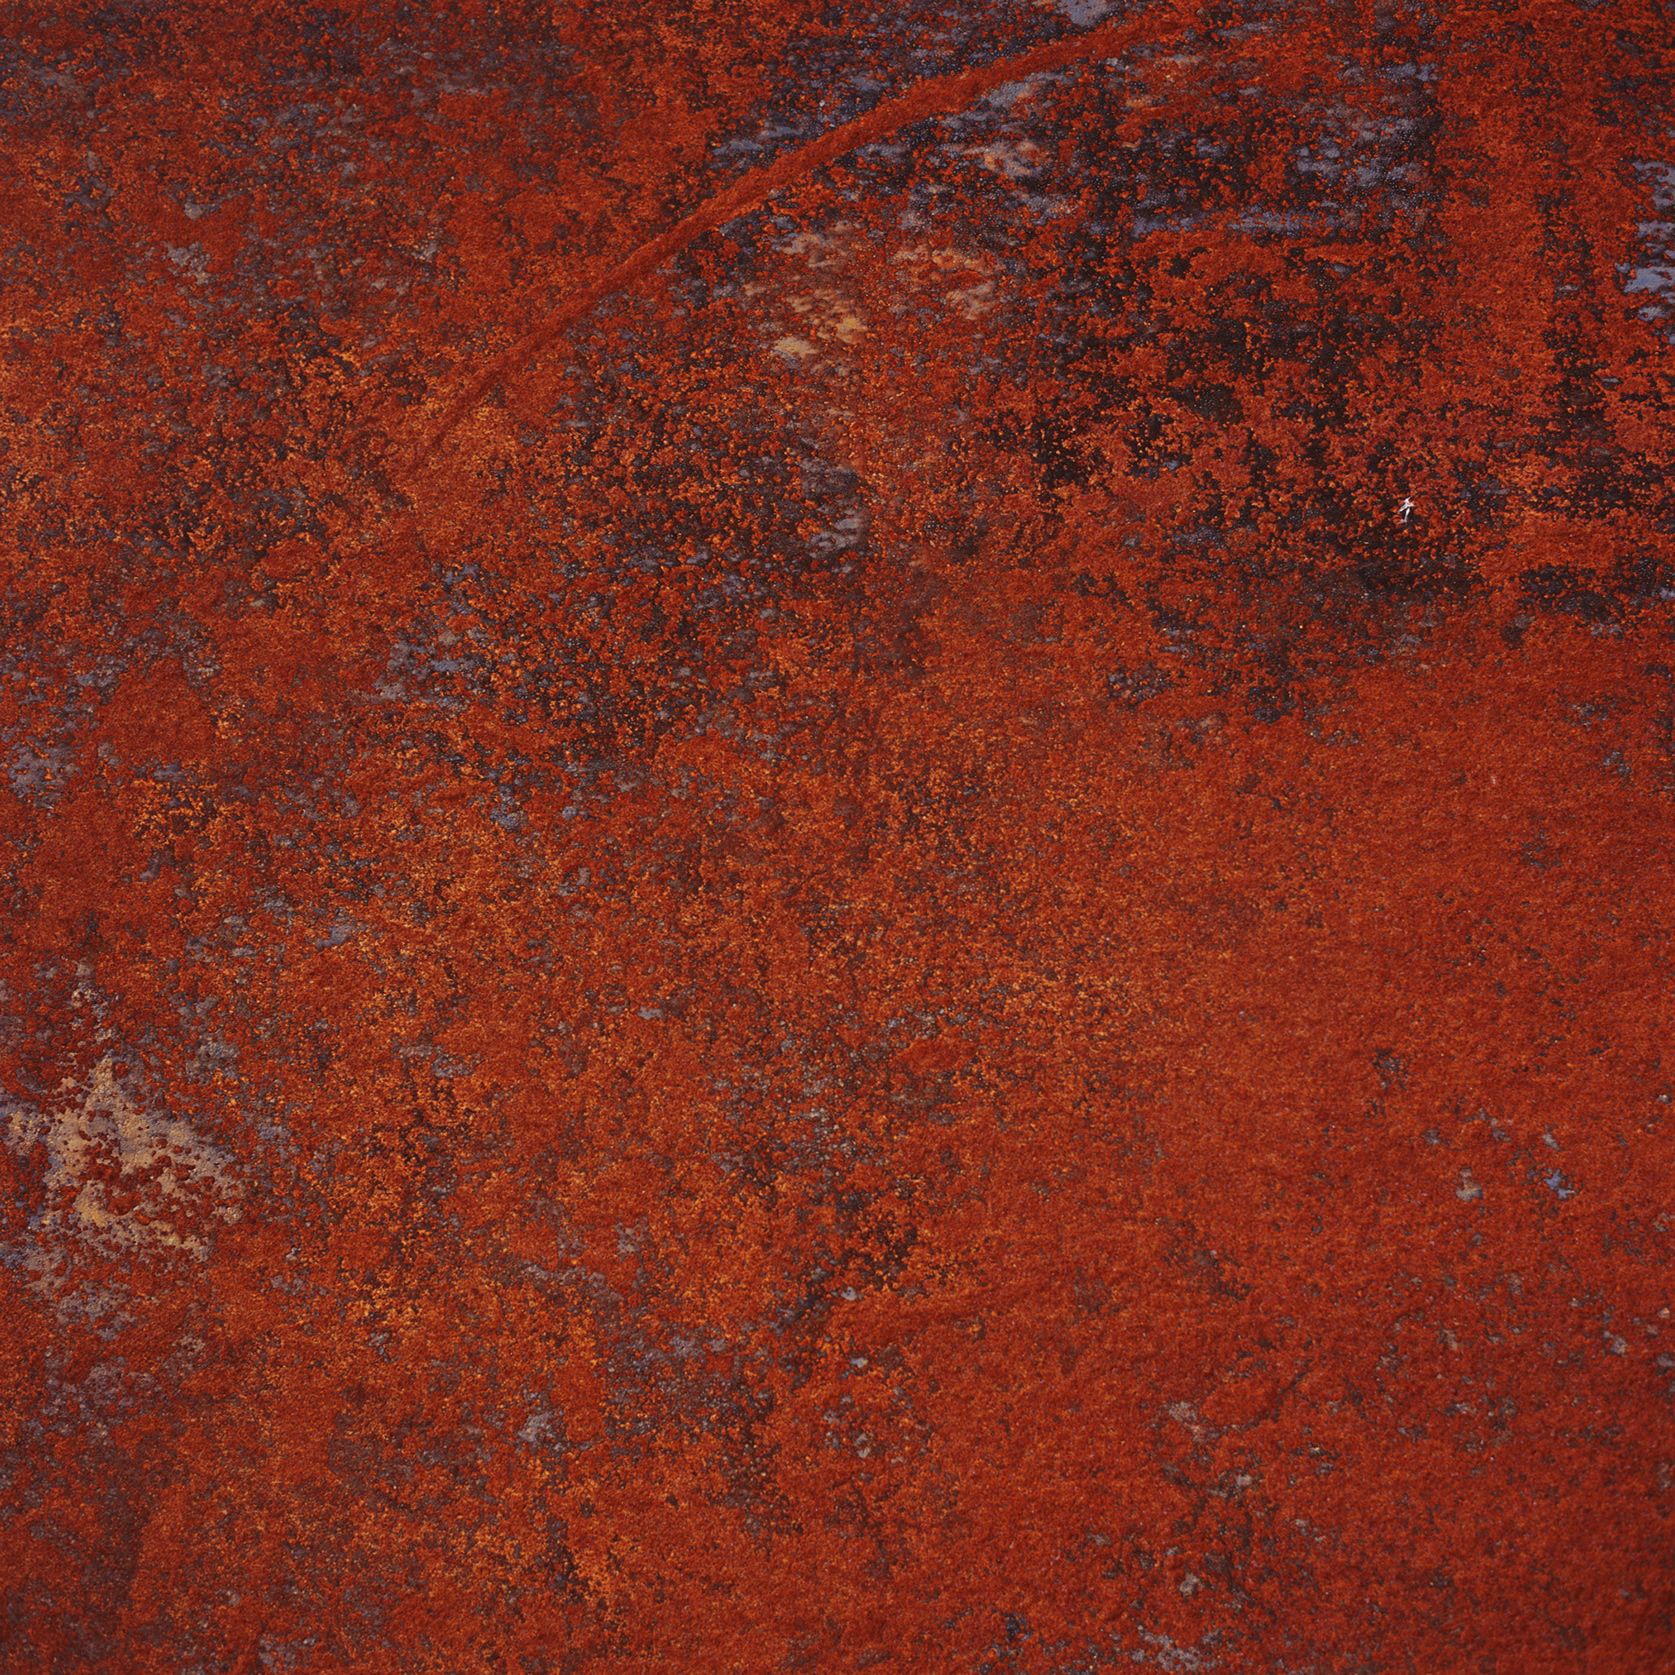 IGP7354g.jpg (3872×2592) | textures | Pinterest | Rust and Collage